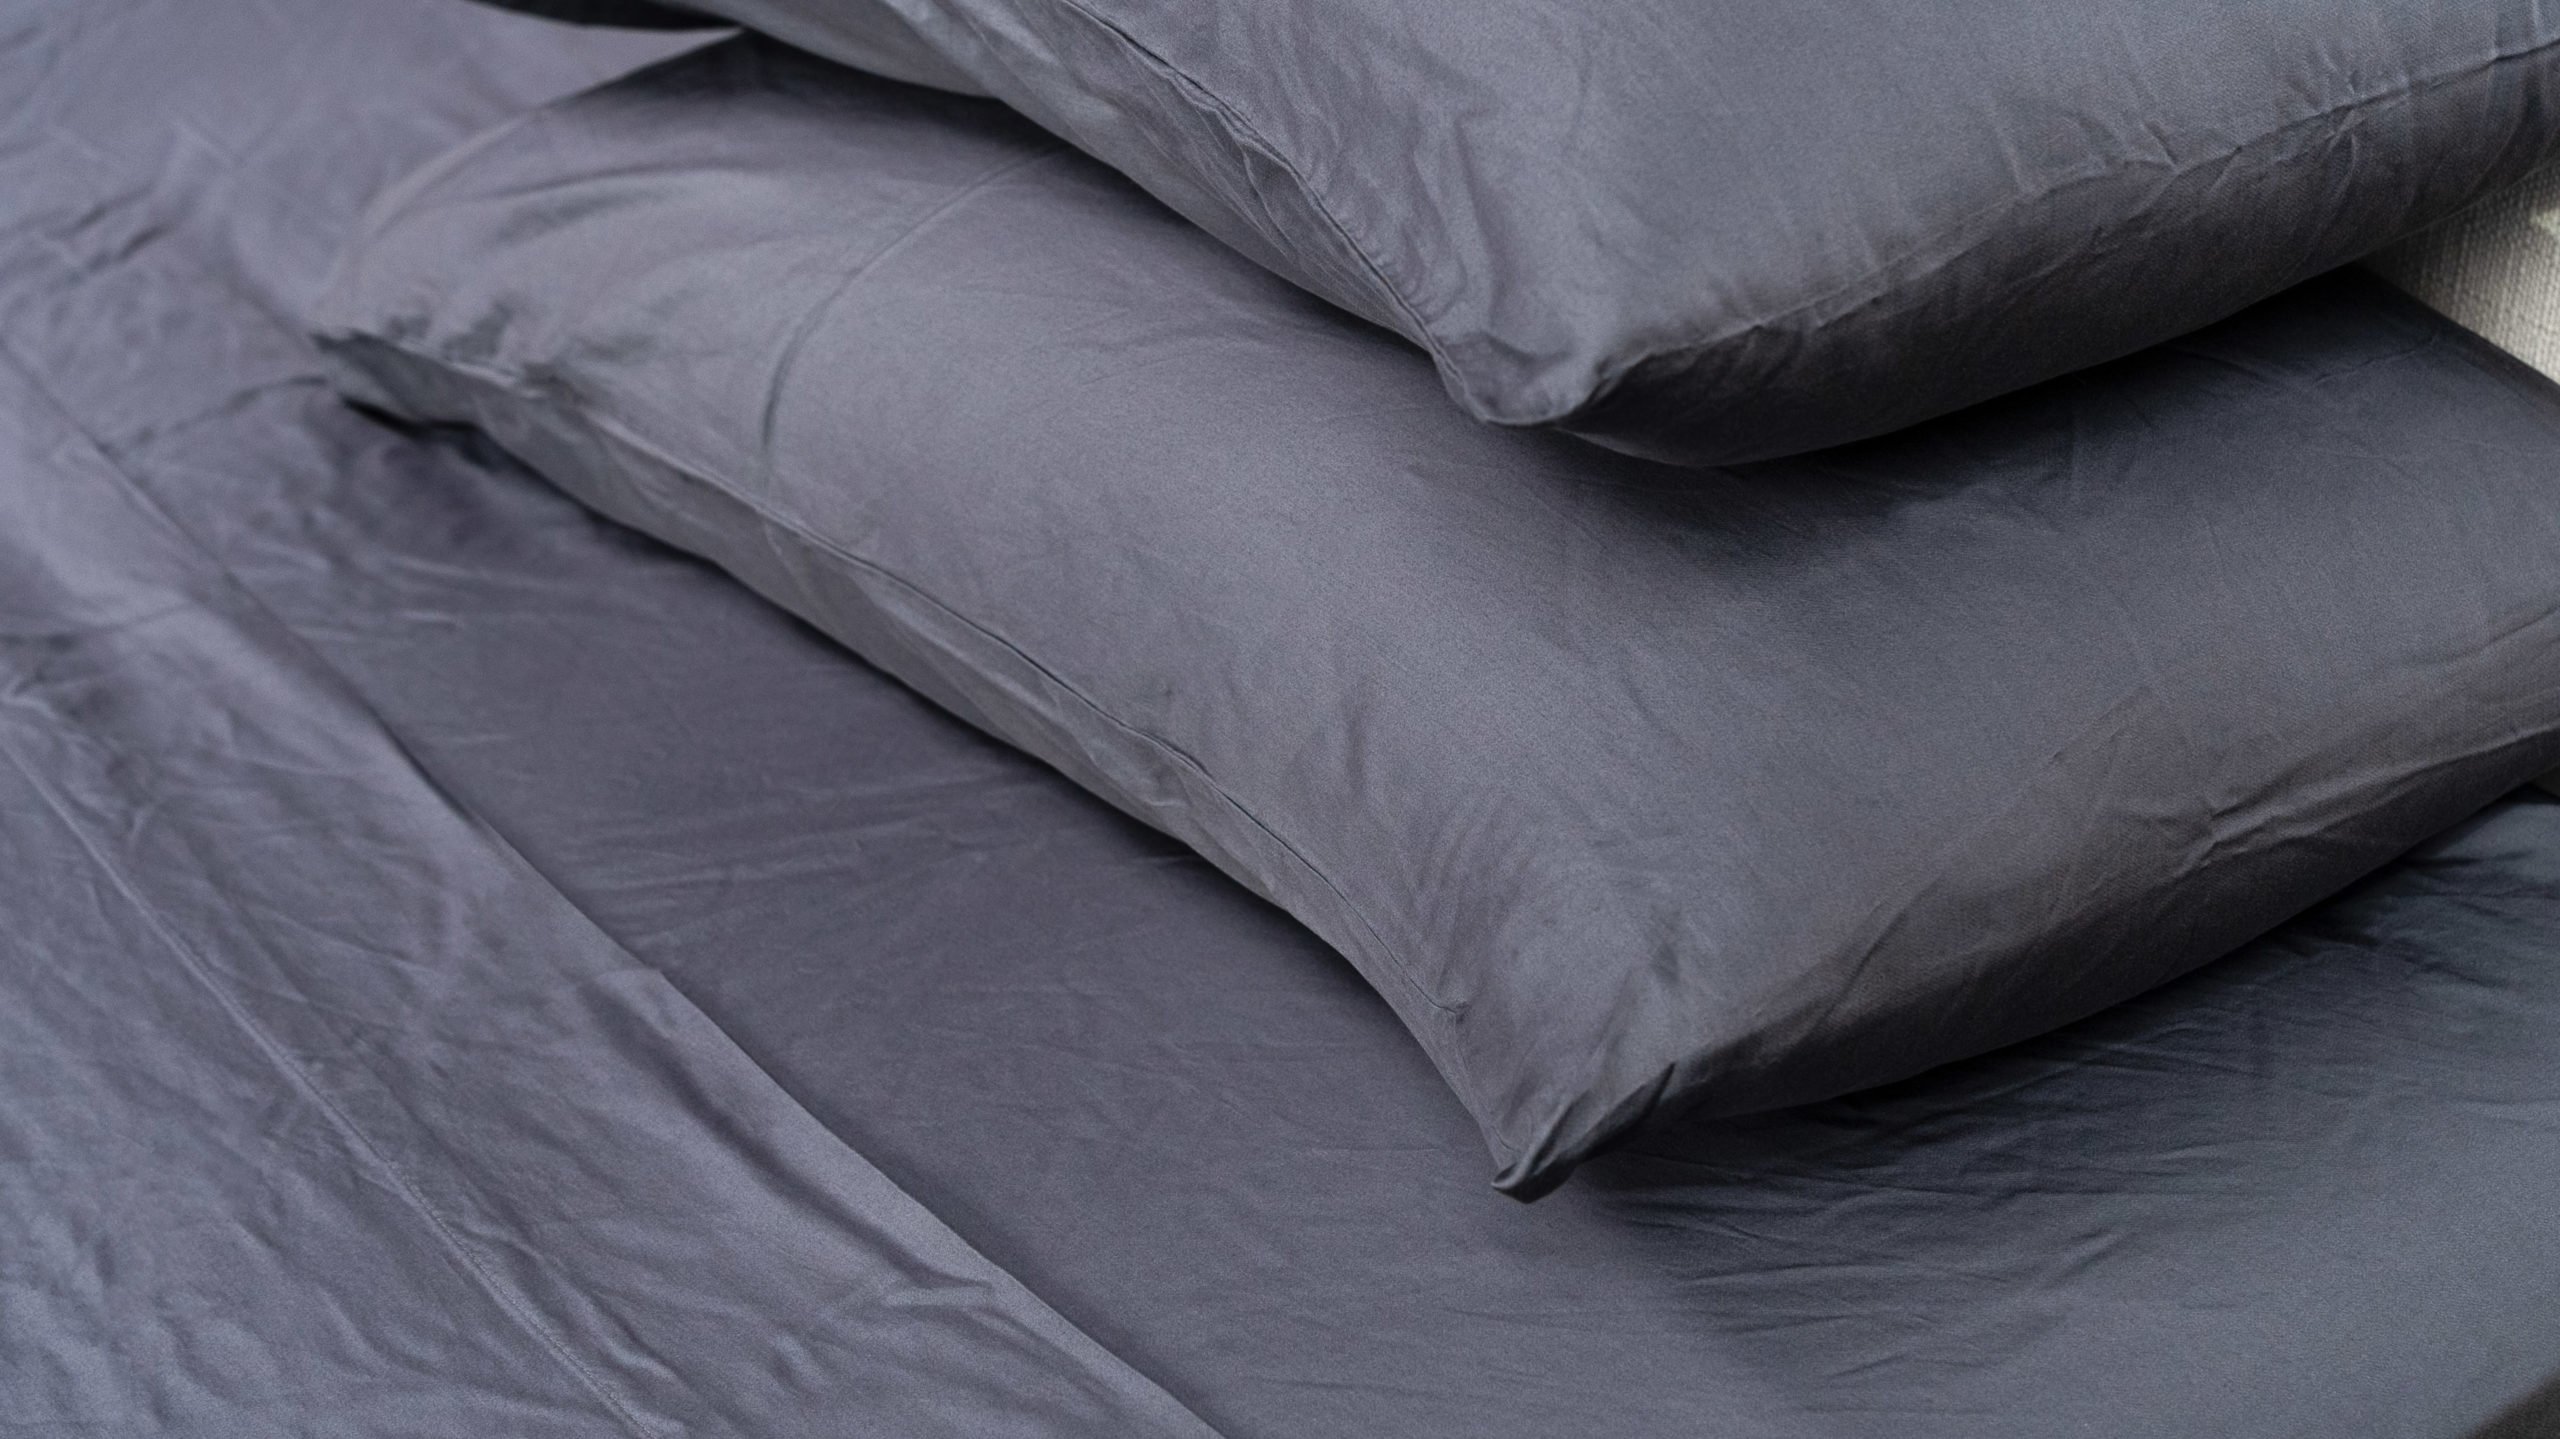 Best Fabric for Sheets to Stay Cool